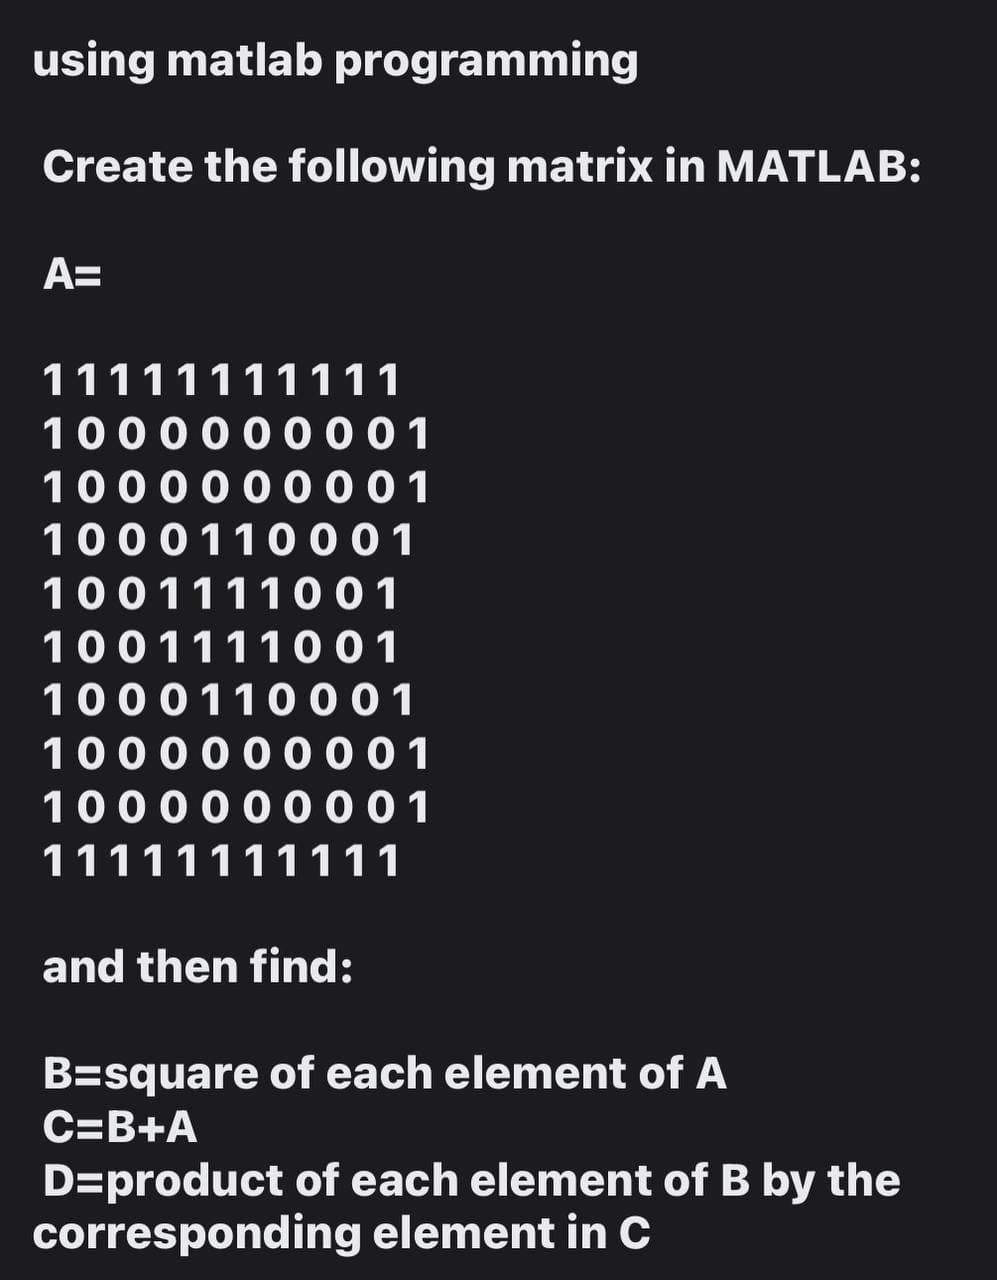 using matlab programming
Create the following matrix in MATLAB:
A=
11111111111
1000000001
1000000001
1000110001
1001111001
1001111001
1000110001
1000000001
1000000001
11111111111
and then find:
B=square of each element of A
C=B+A
D=product of each element of B by the
corresponding element in C